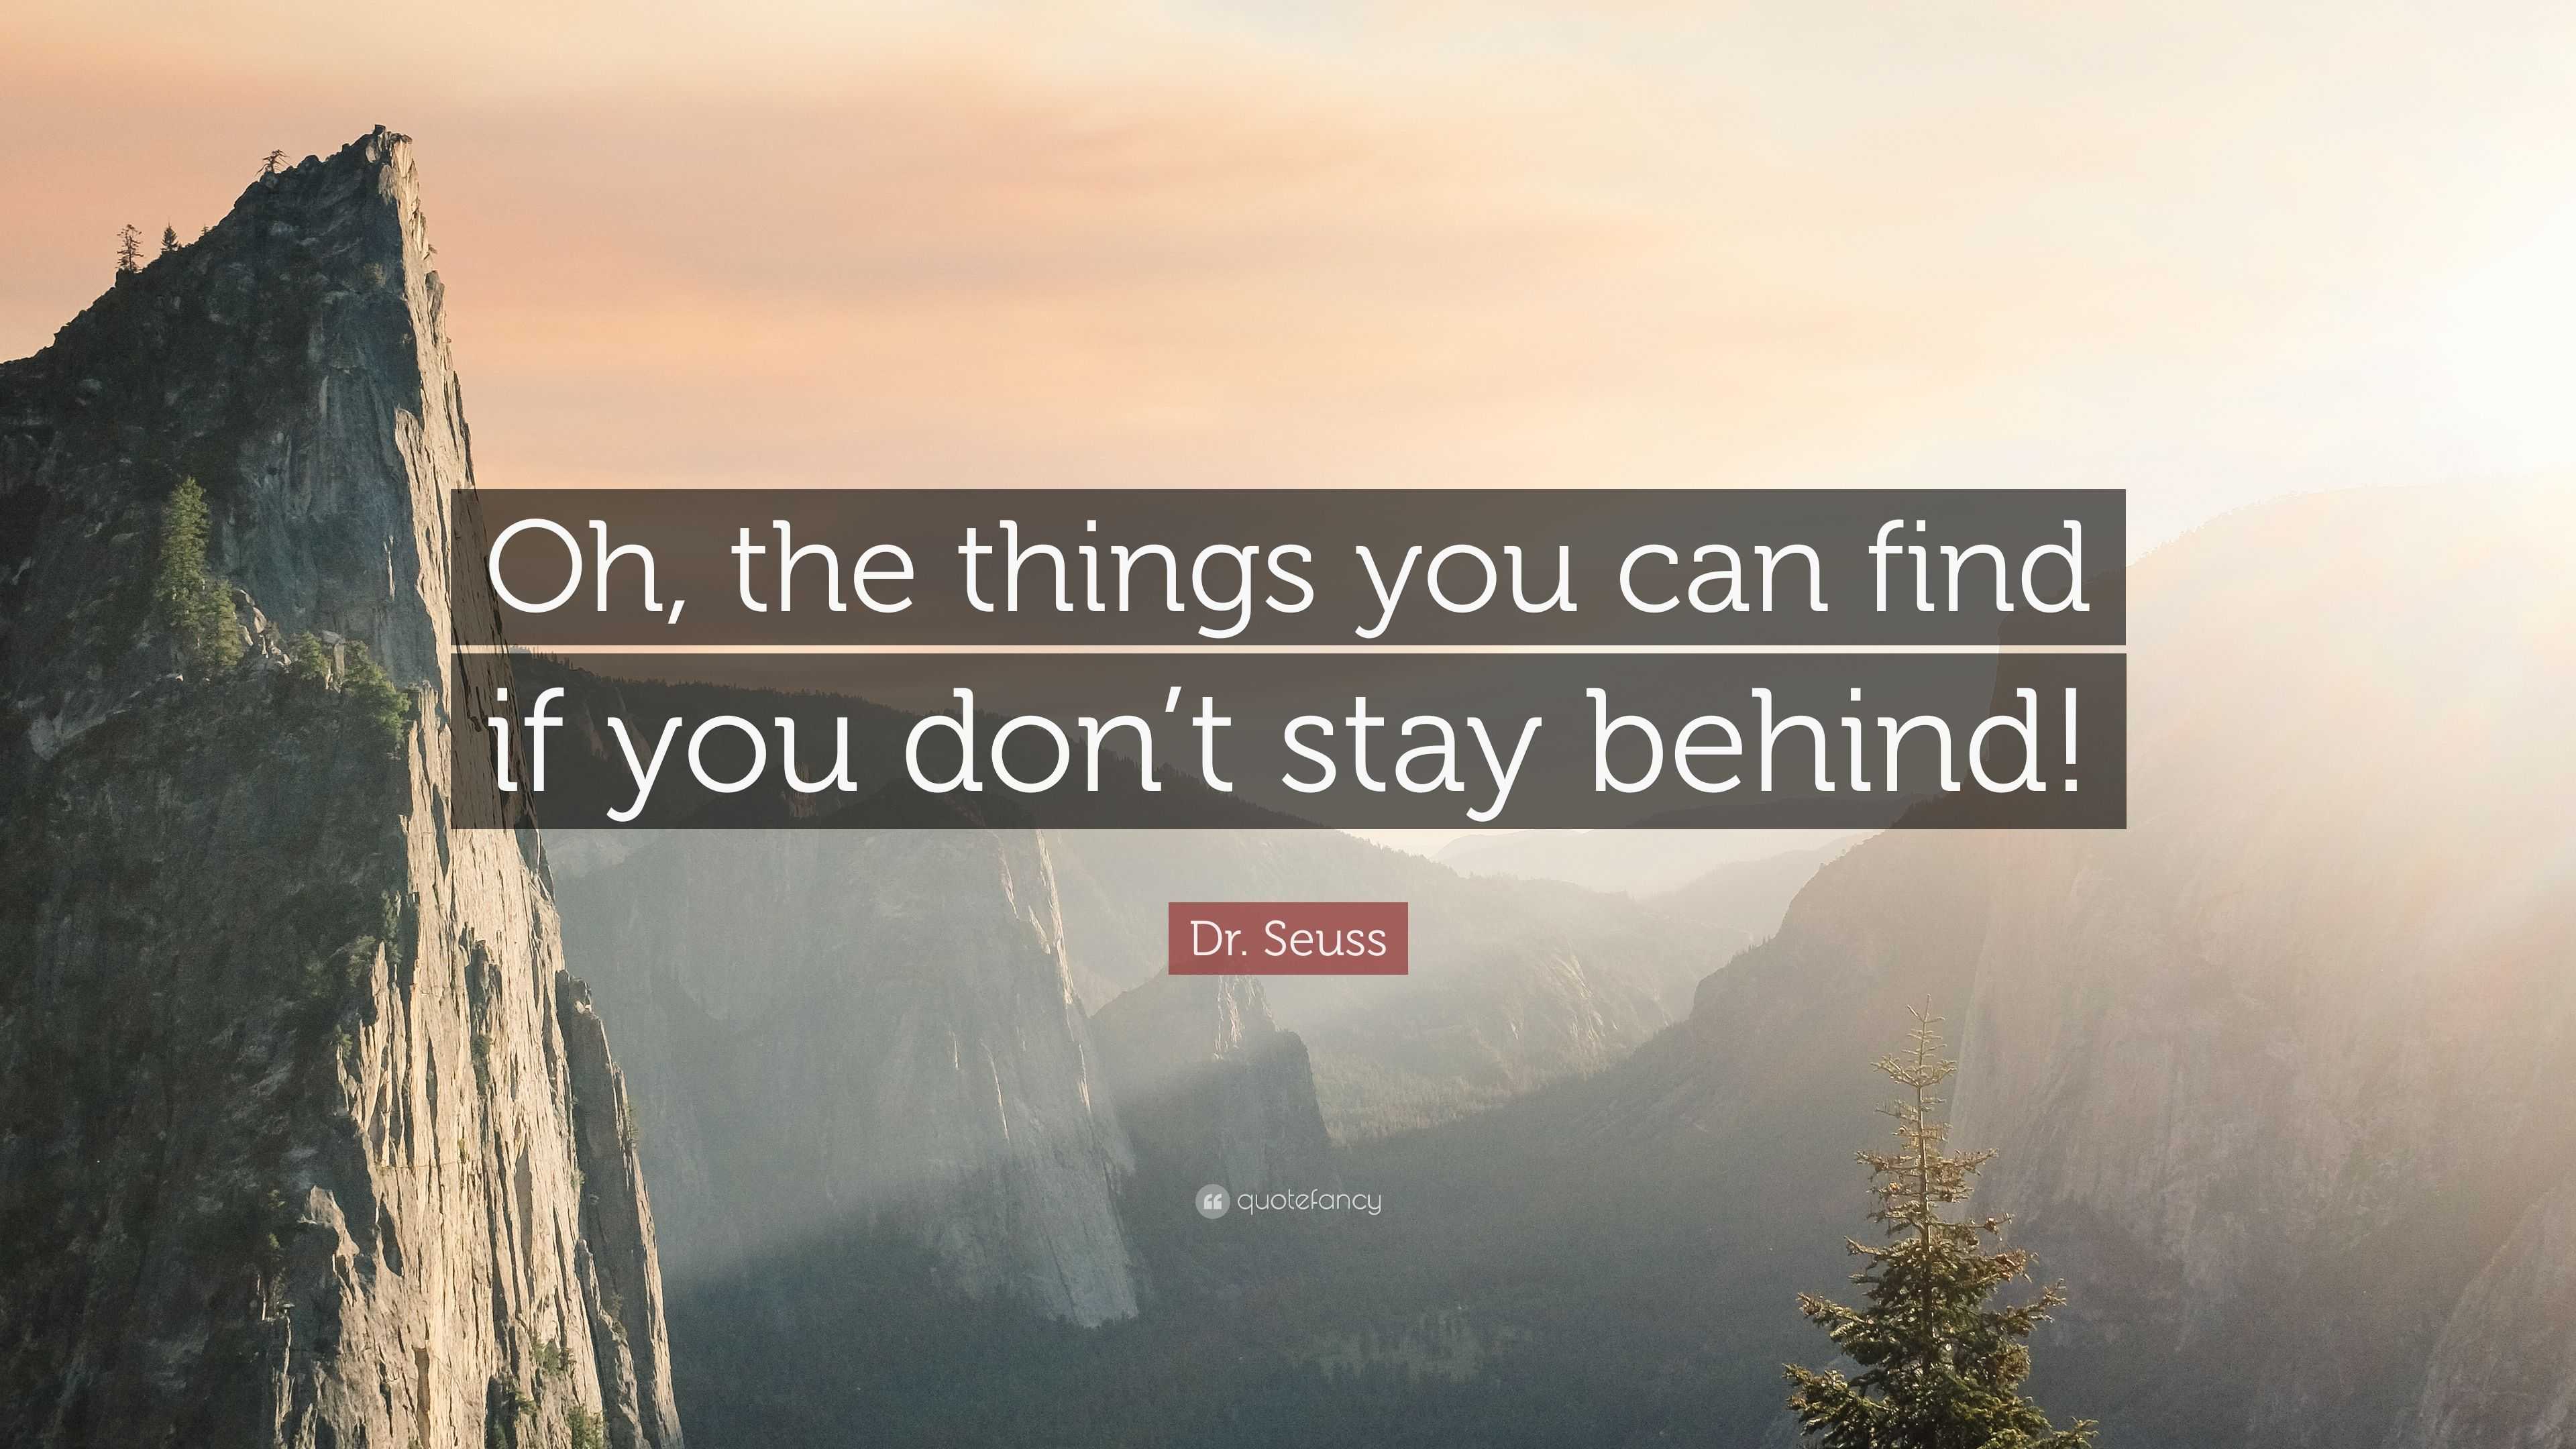 Dr. Seuss Quote: "Oh, the things you can find if you don't stay behind!" (10 wallpapers ...